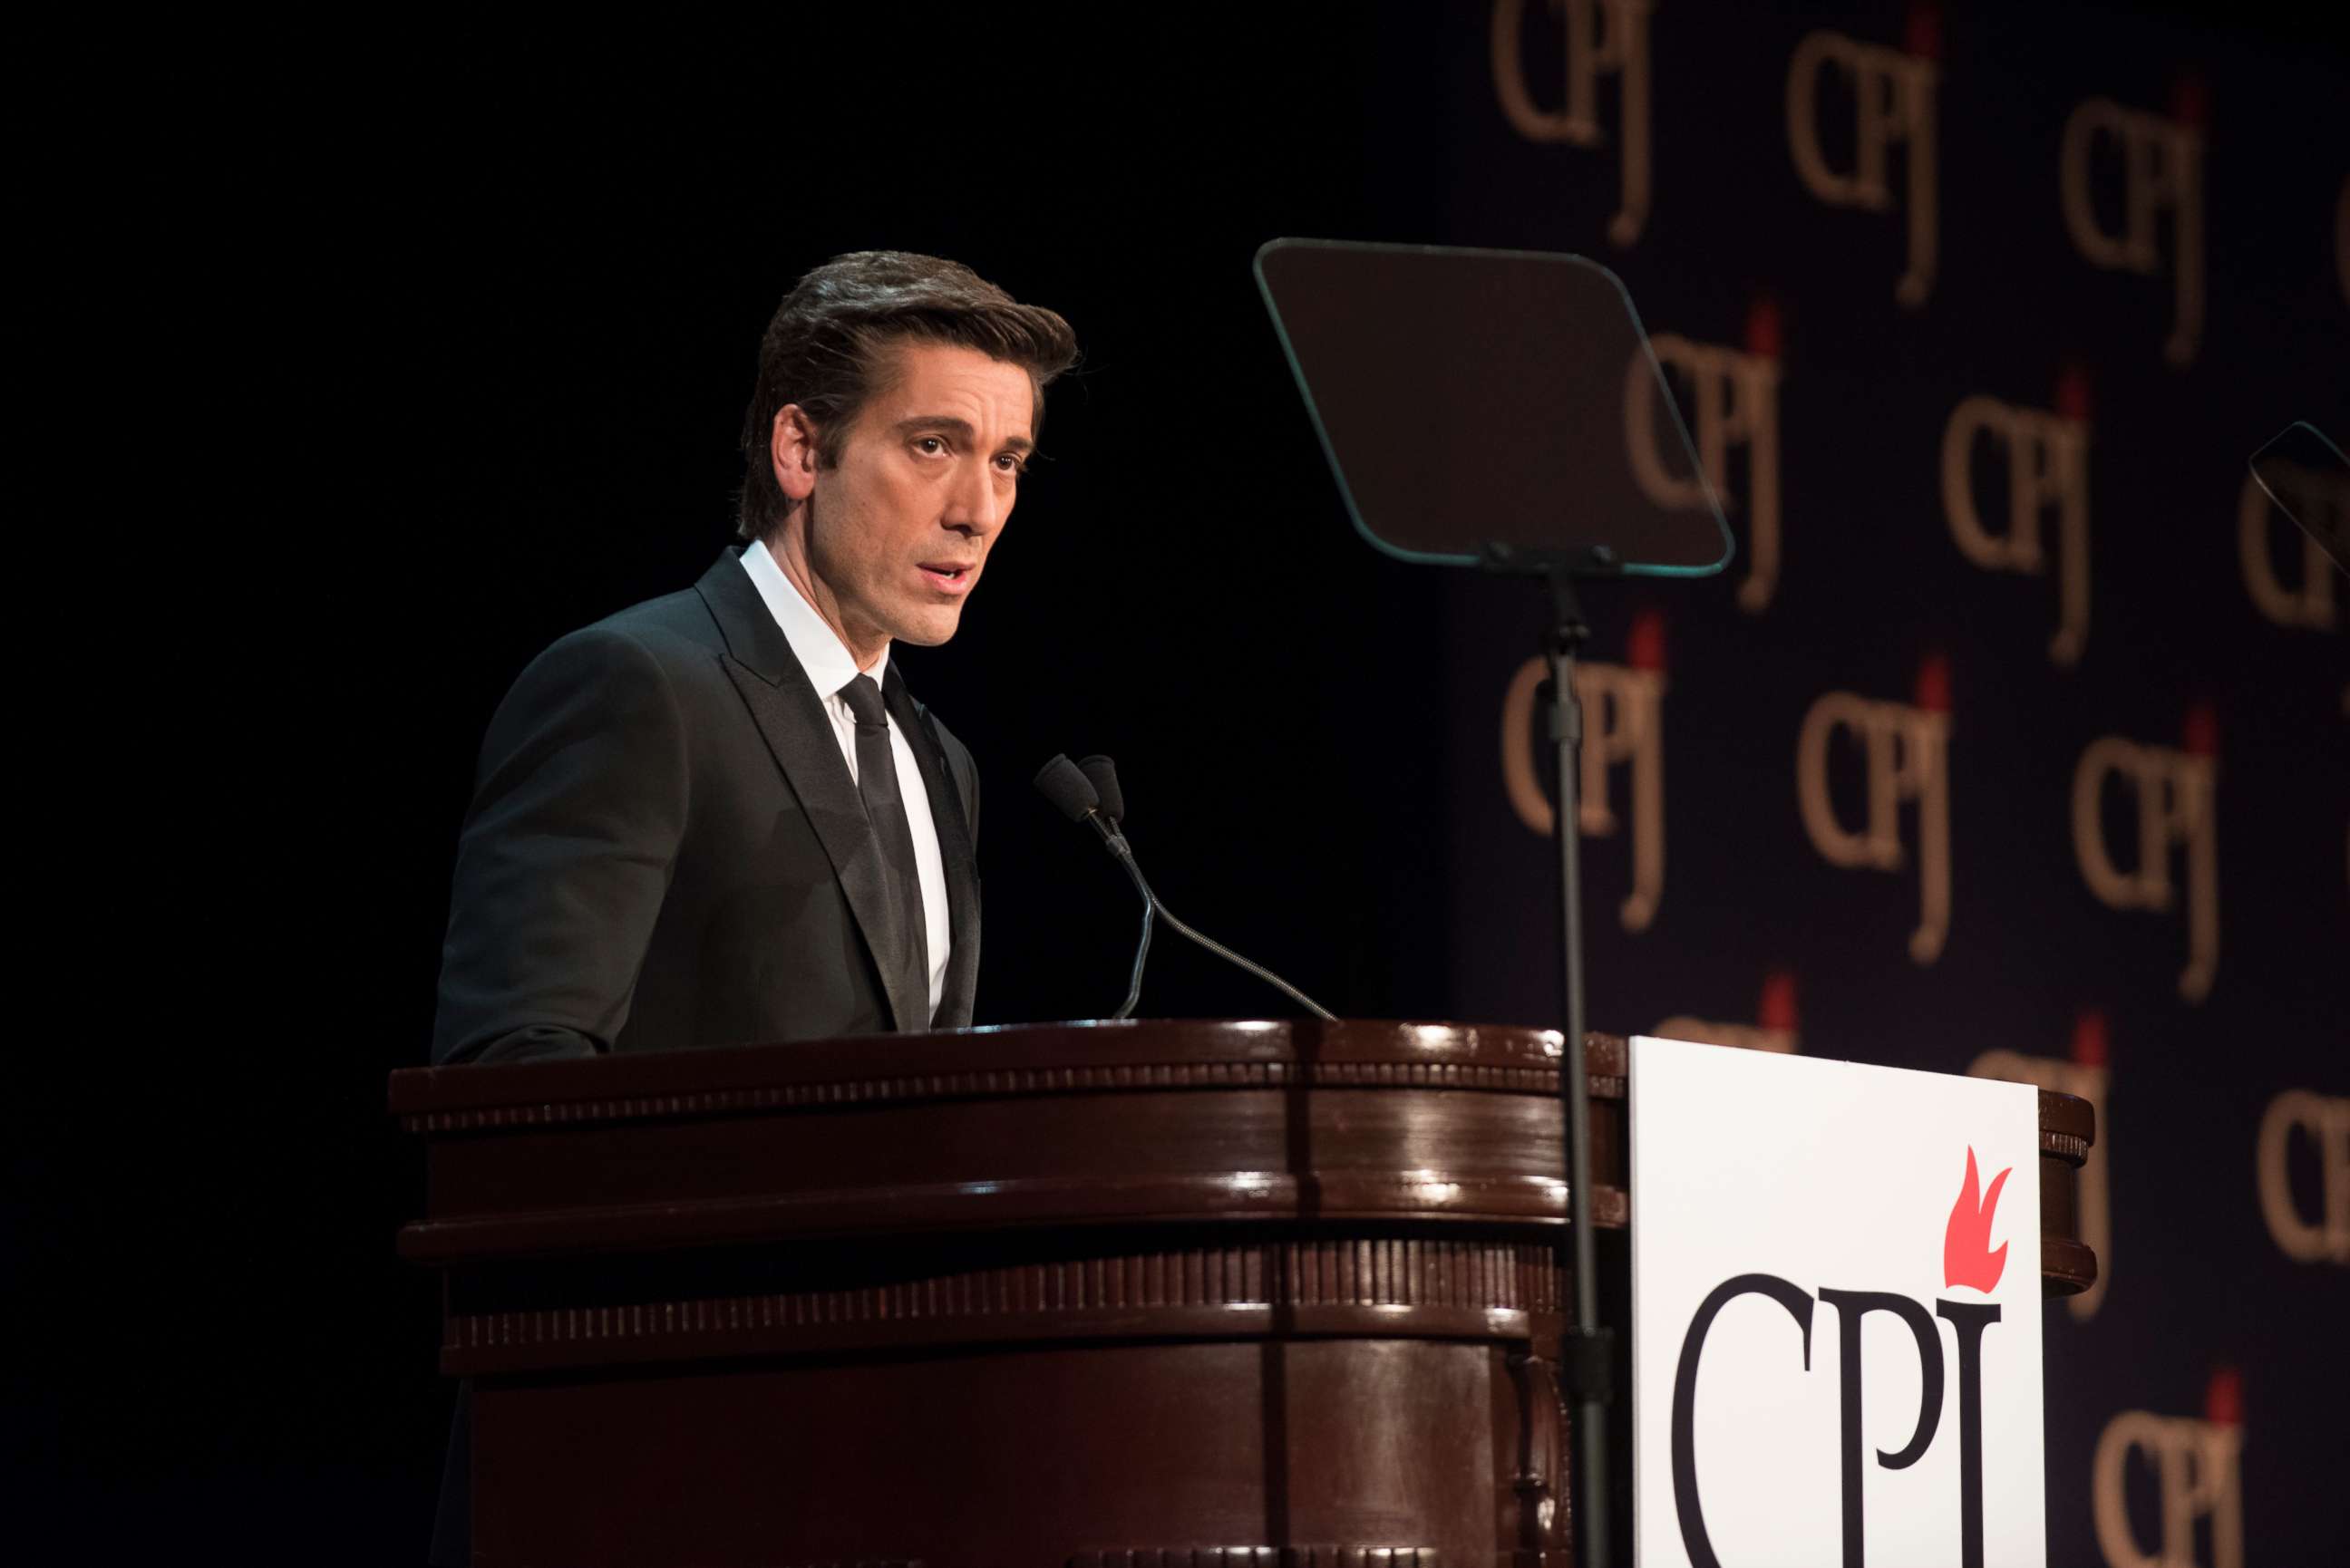 PHOTO: ABC News' David Muir hosts the Committee to Protect Journalists' Freedom Awards.